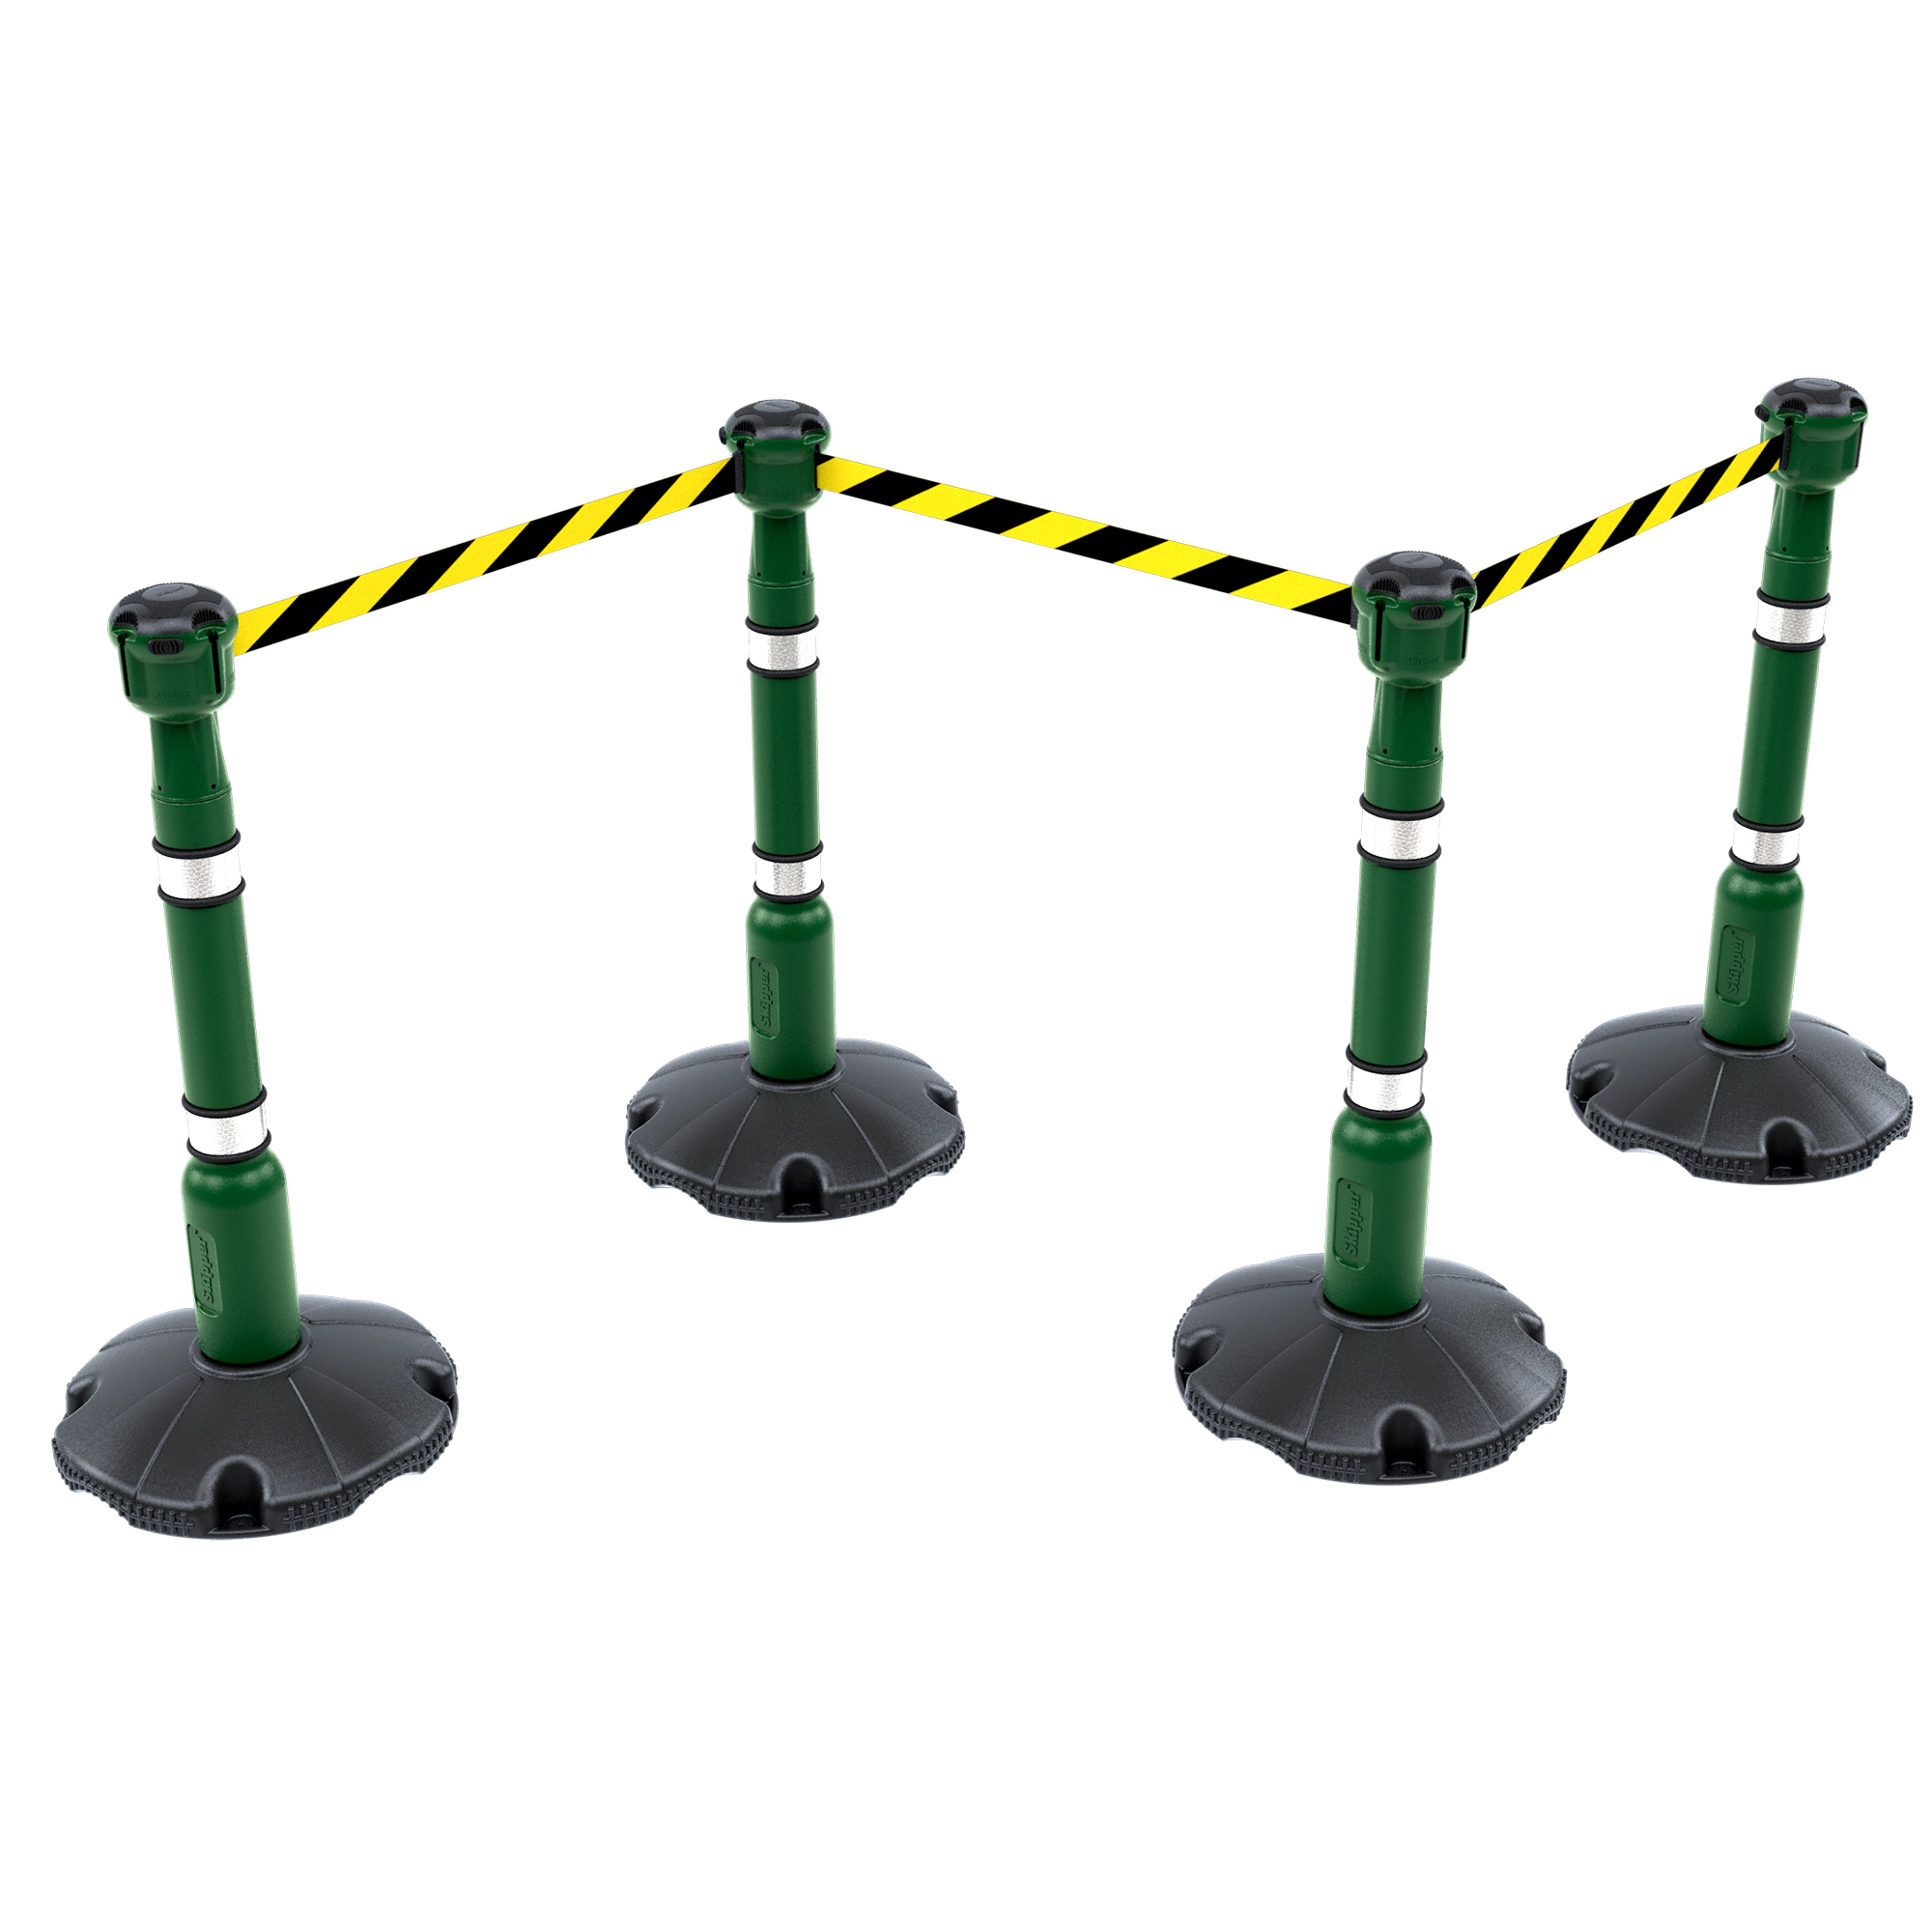 Skipper™ Portable Safety Barrier Kit 27m Is Durable And Built to Withstand The Rigours of Daily Work Environments 